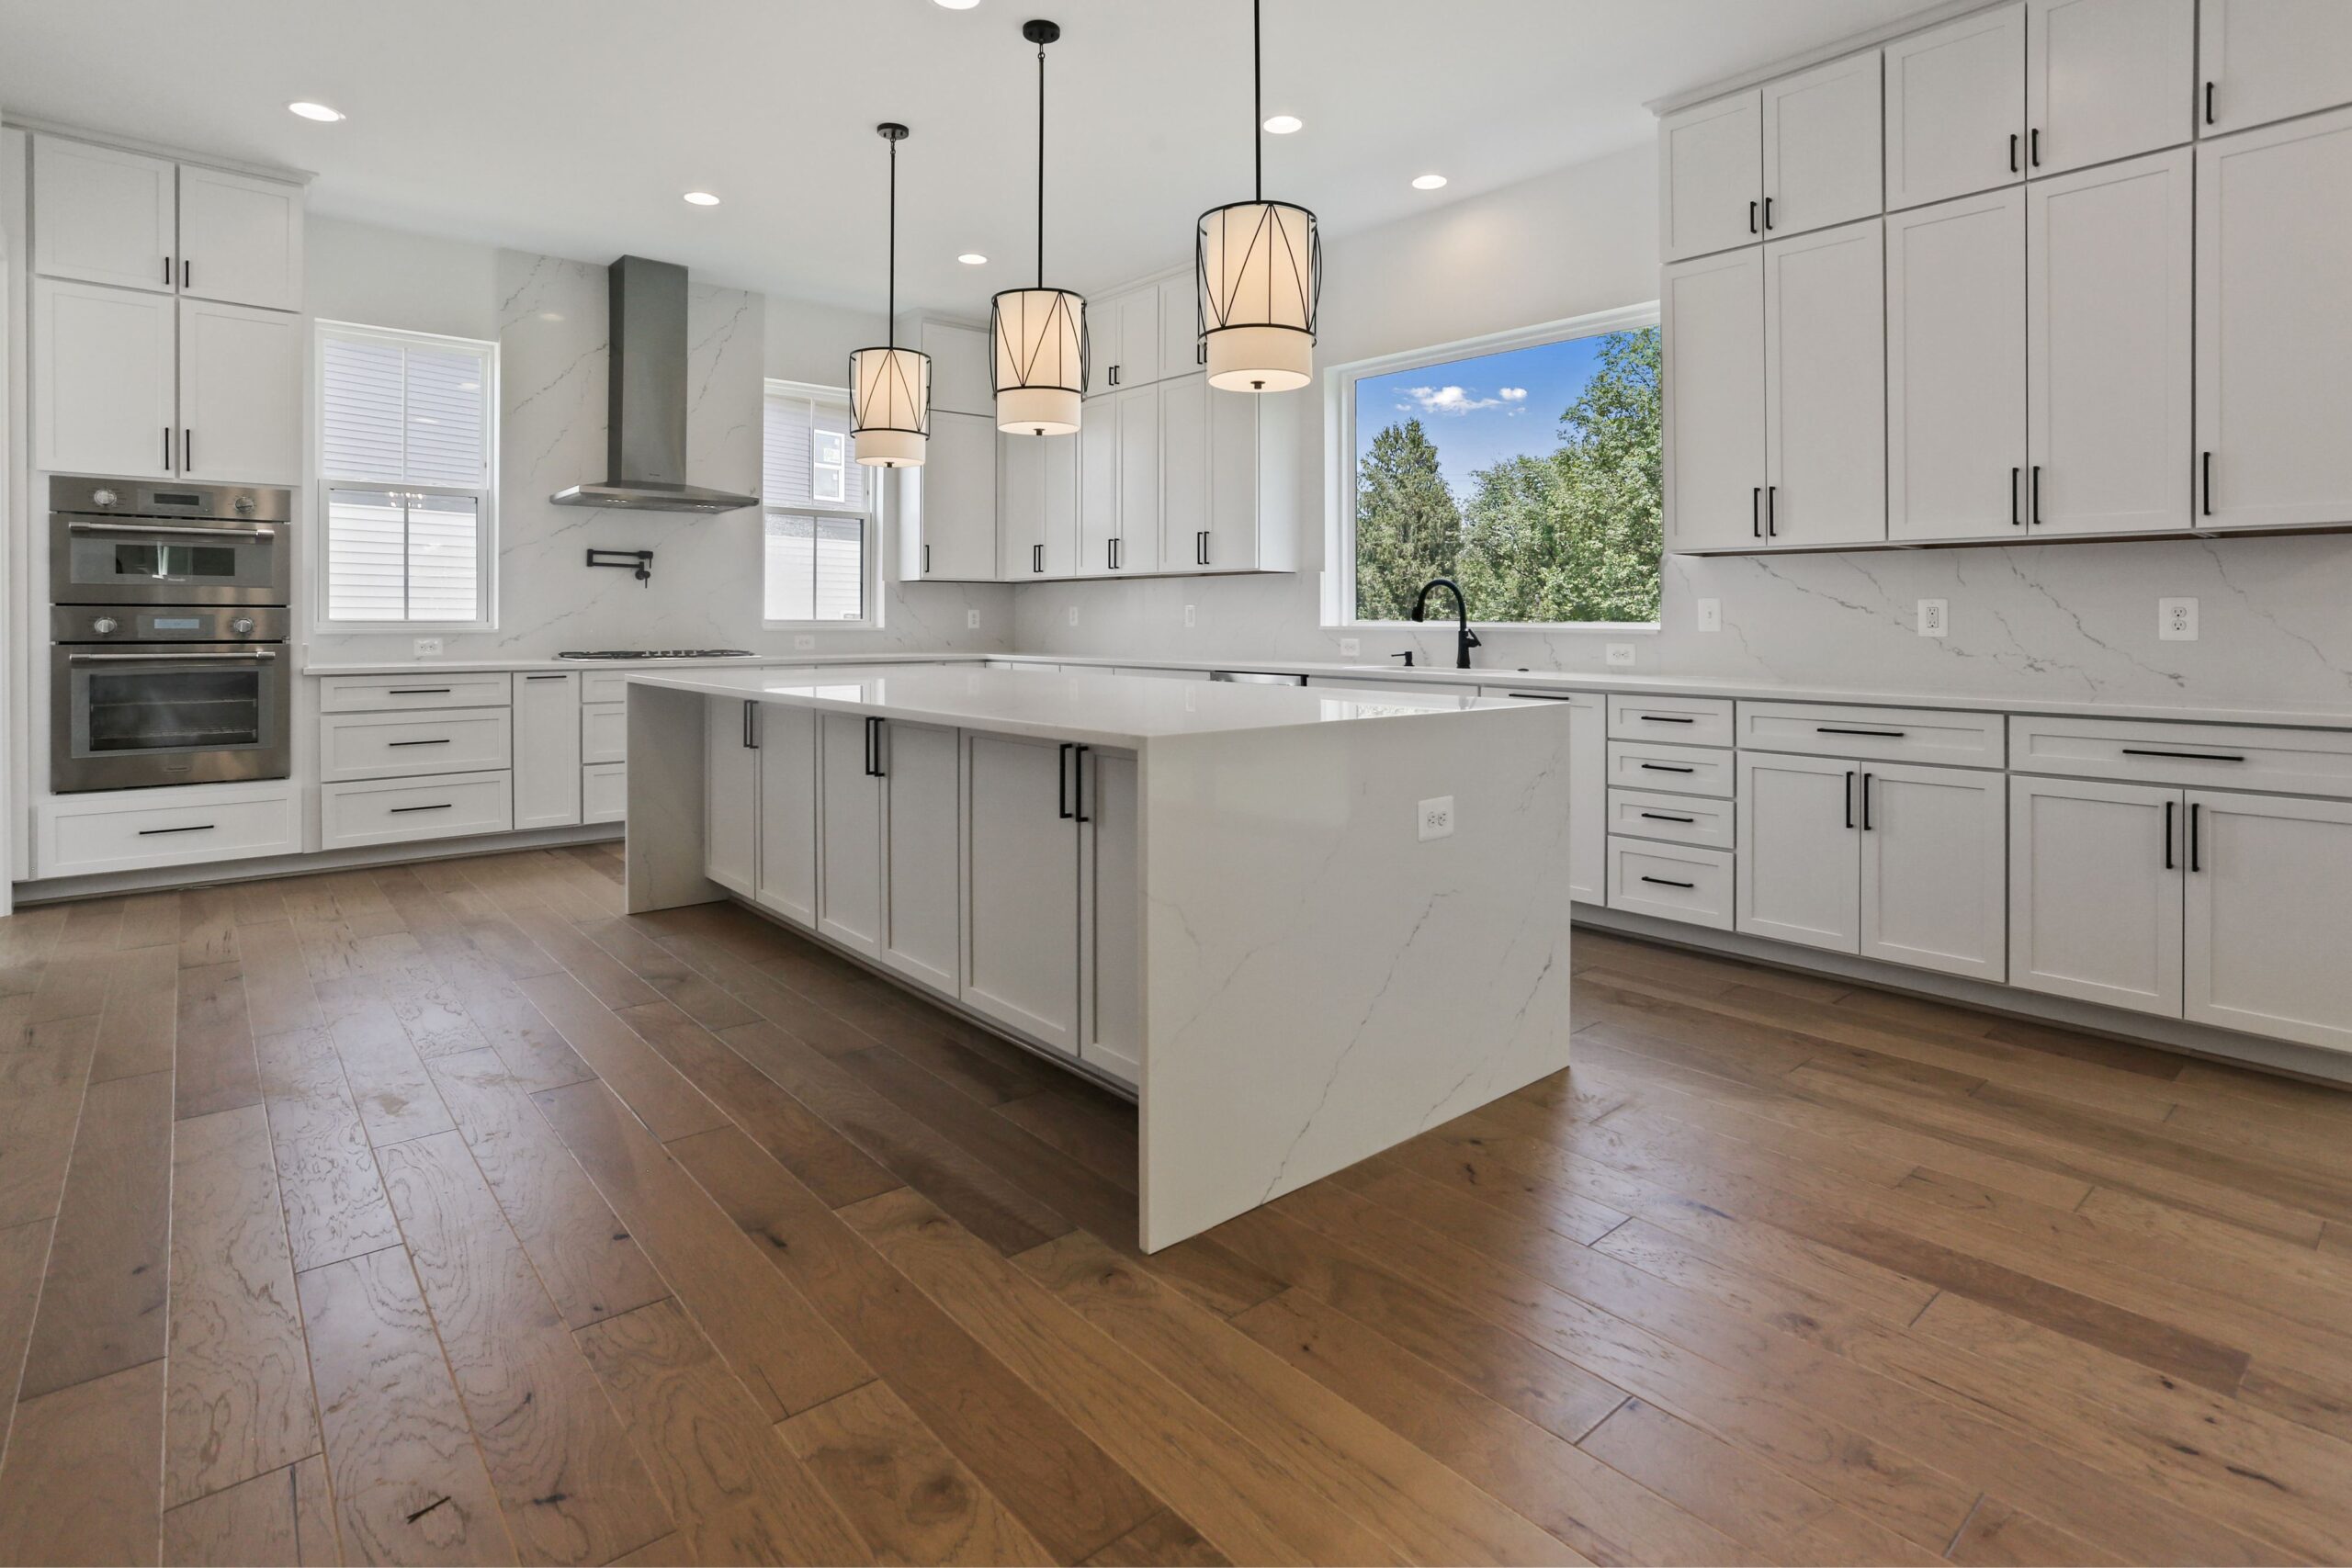 Spacious kitchen with a wealth of sleek white cabinetry and large center island.